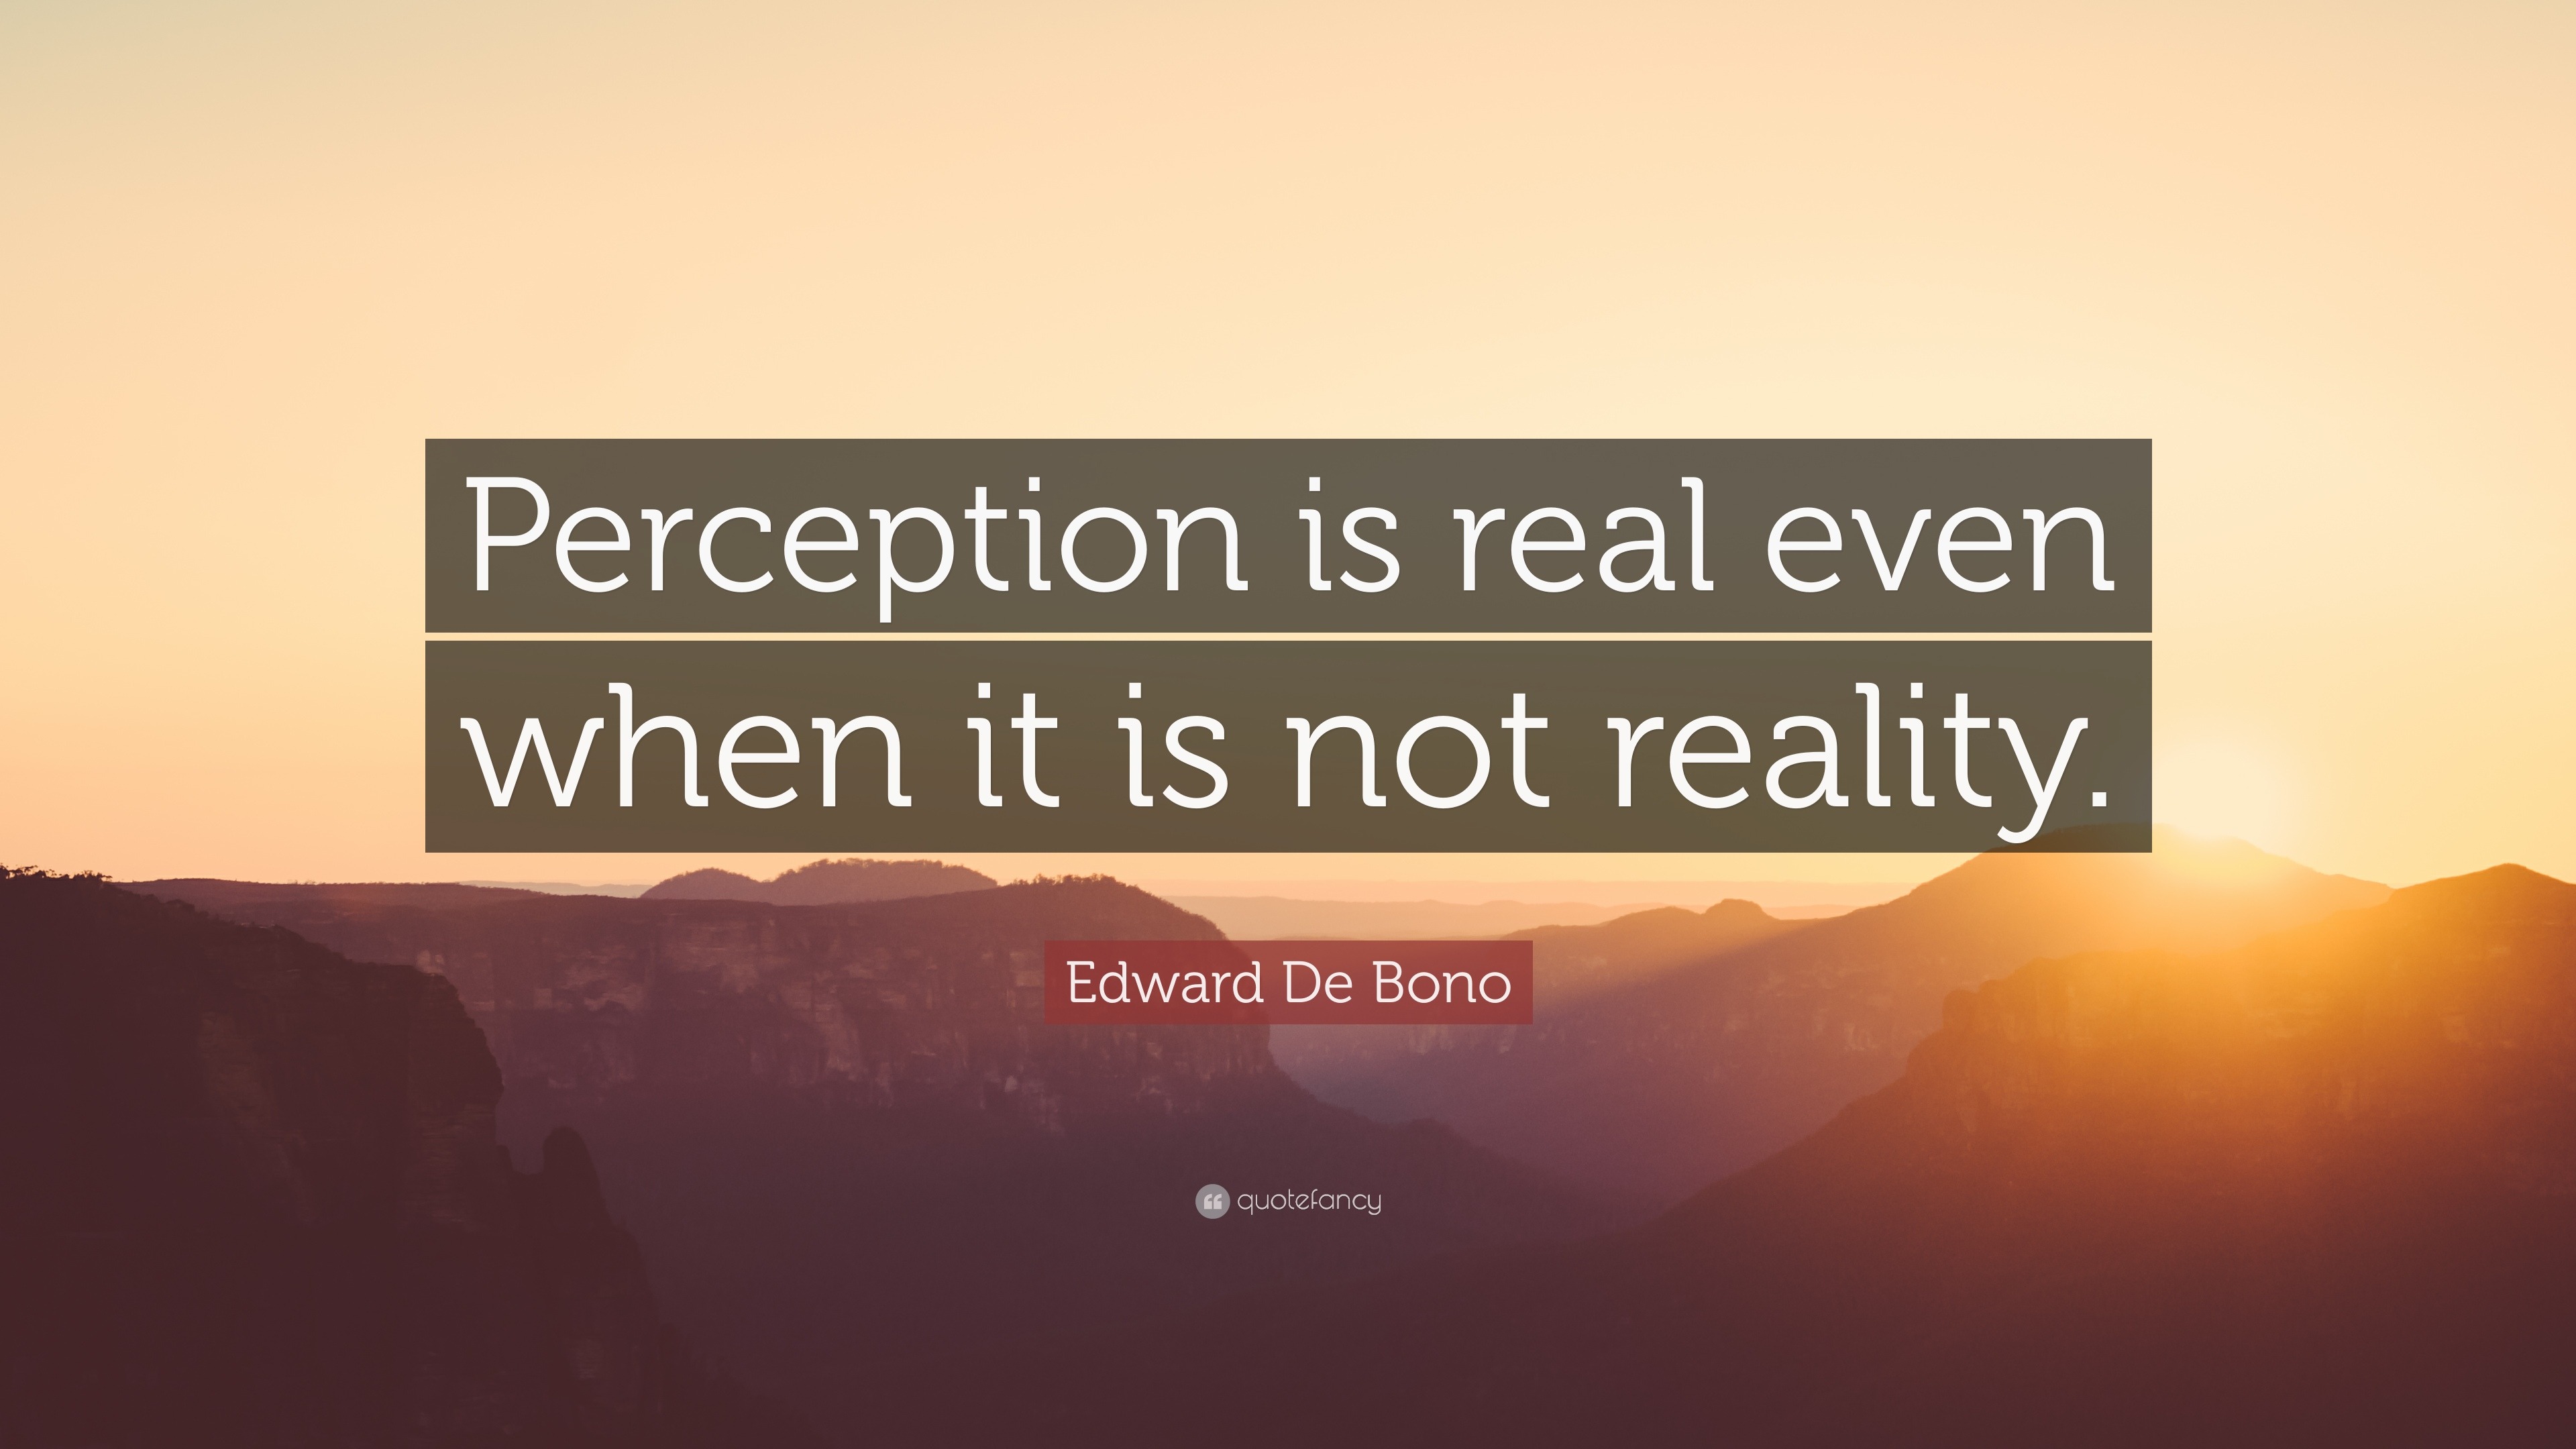 Edward De Bono Quote: “Perception is real even when it is not reality ...